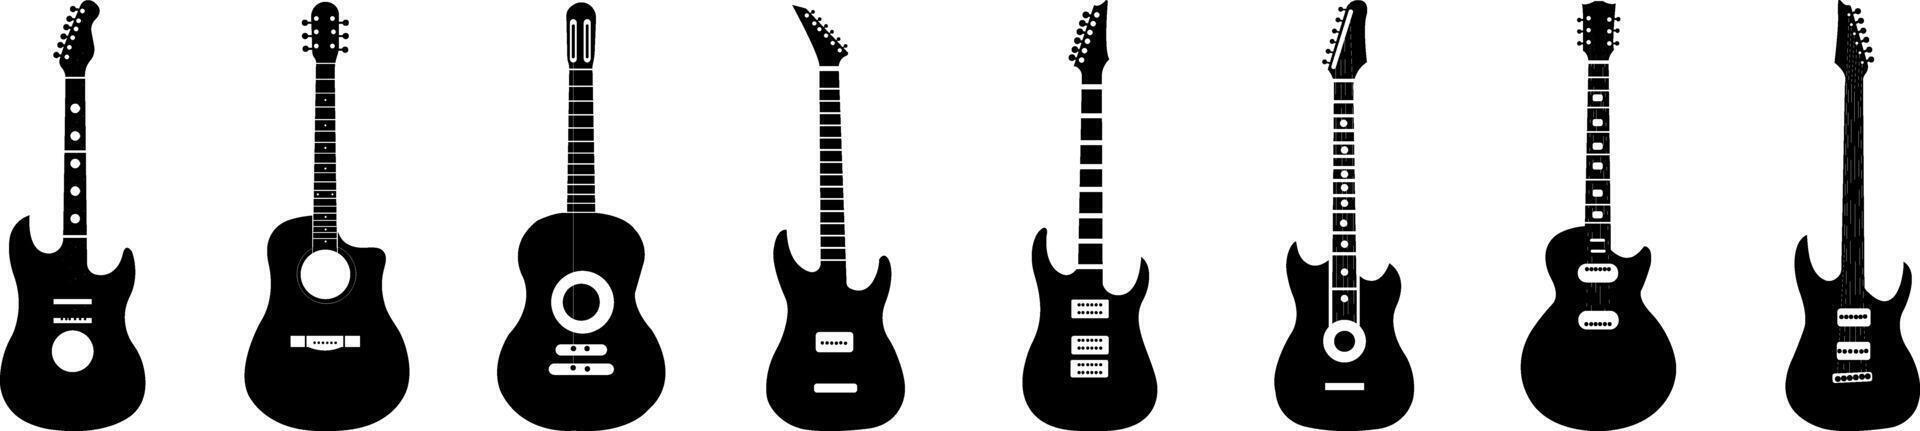 Musical Instruments Acoustic and Electric Guitar Silhouette Design Set vector